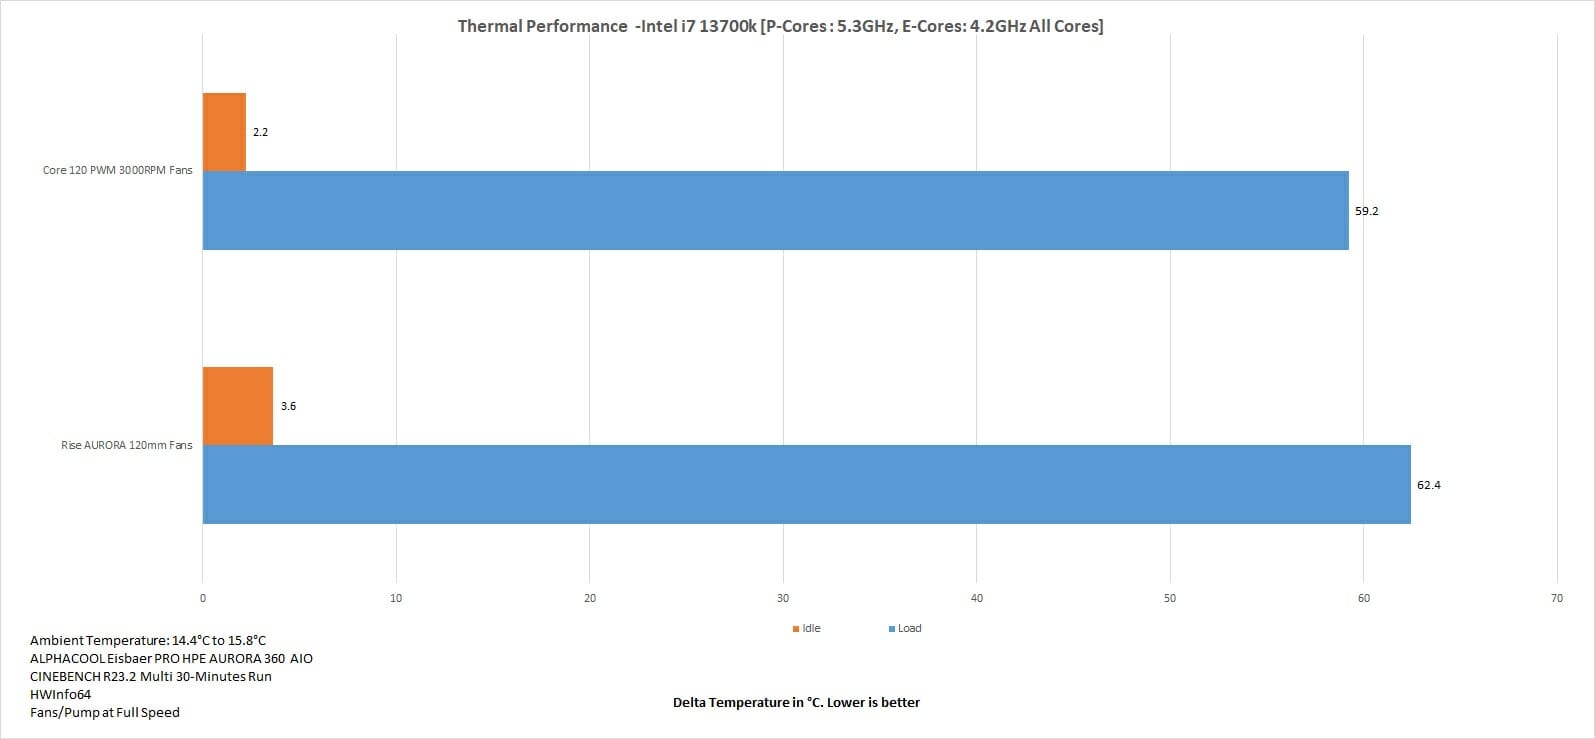 Thermal Performance 3